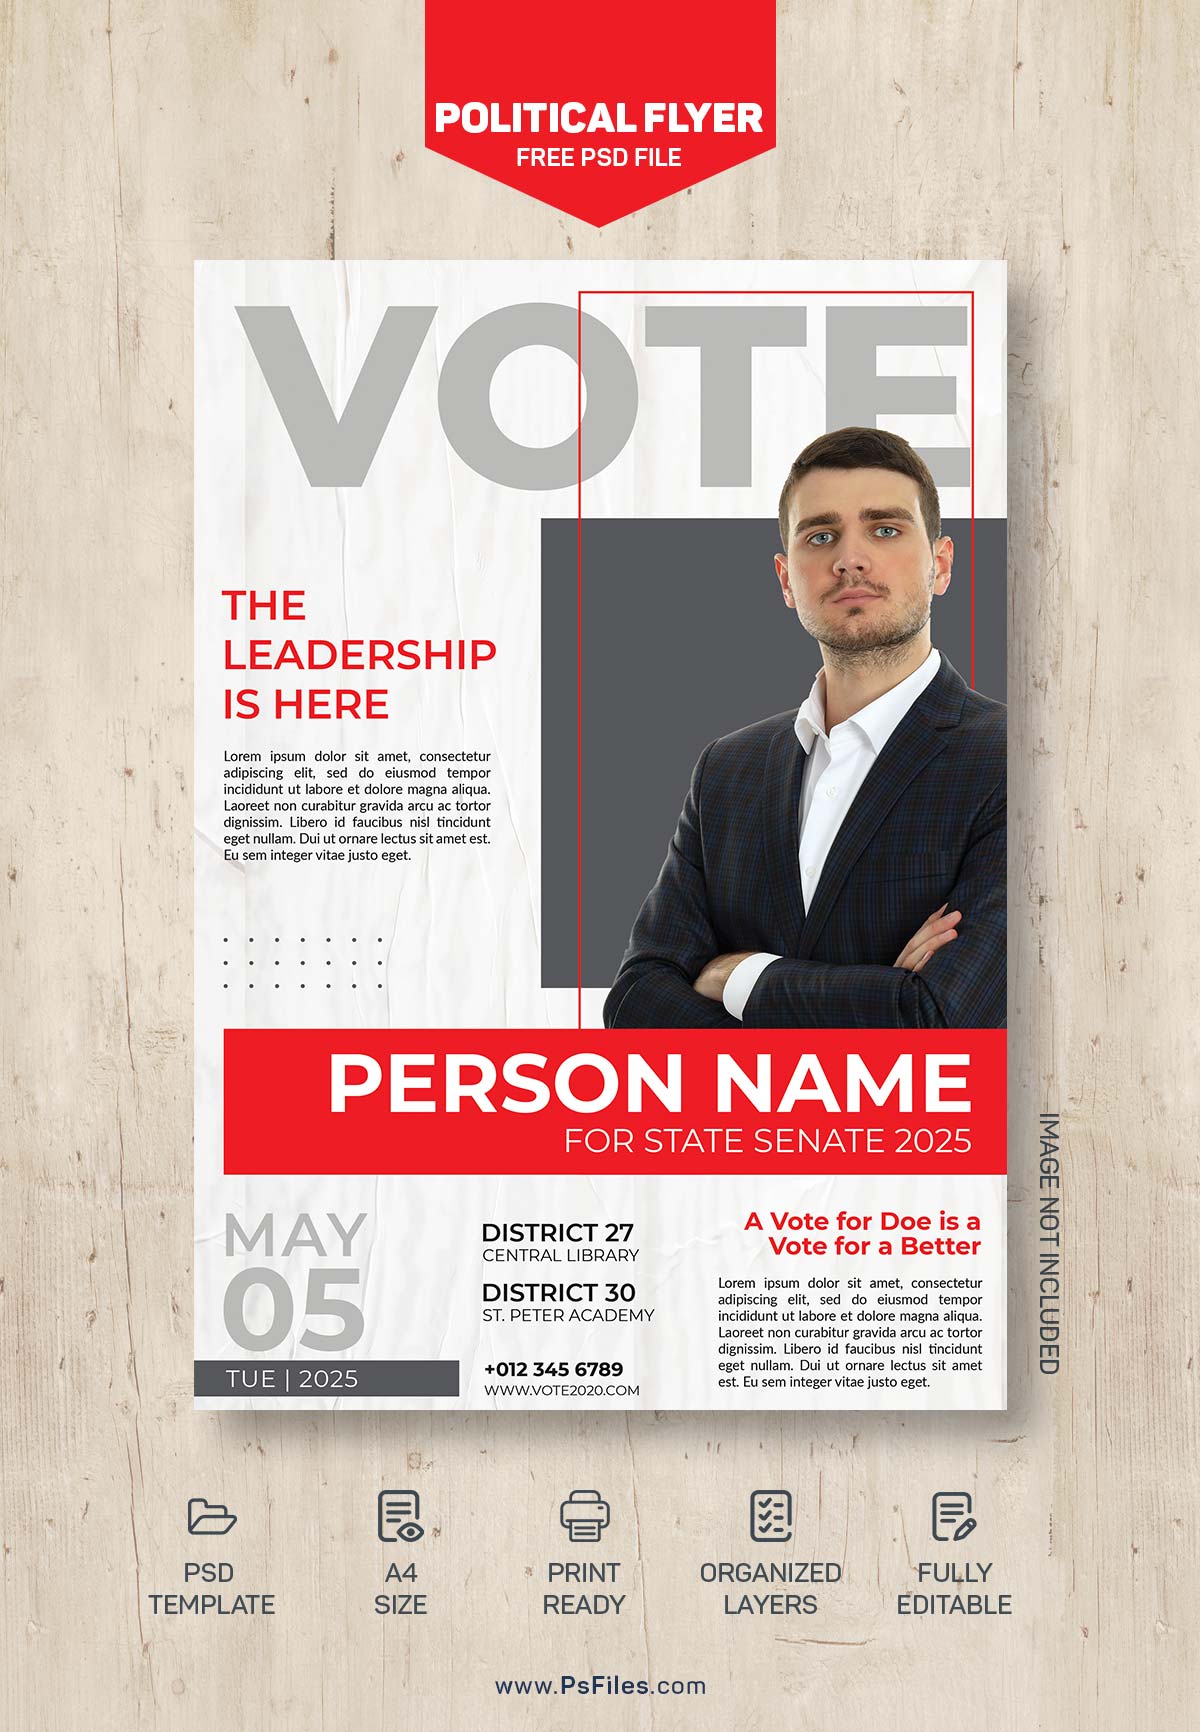 Free Professional Political Election Flyer PSD Template - PsFiles Regarding Political Flyer Template Free